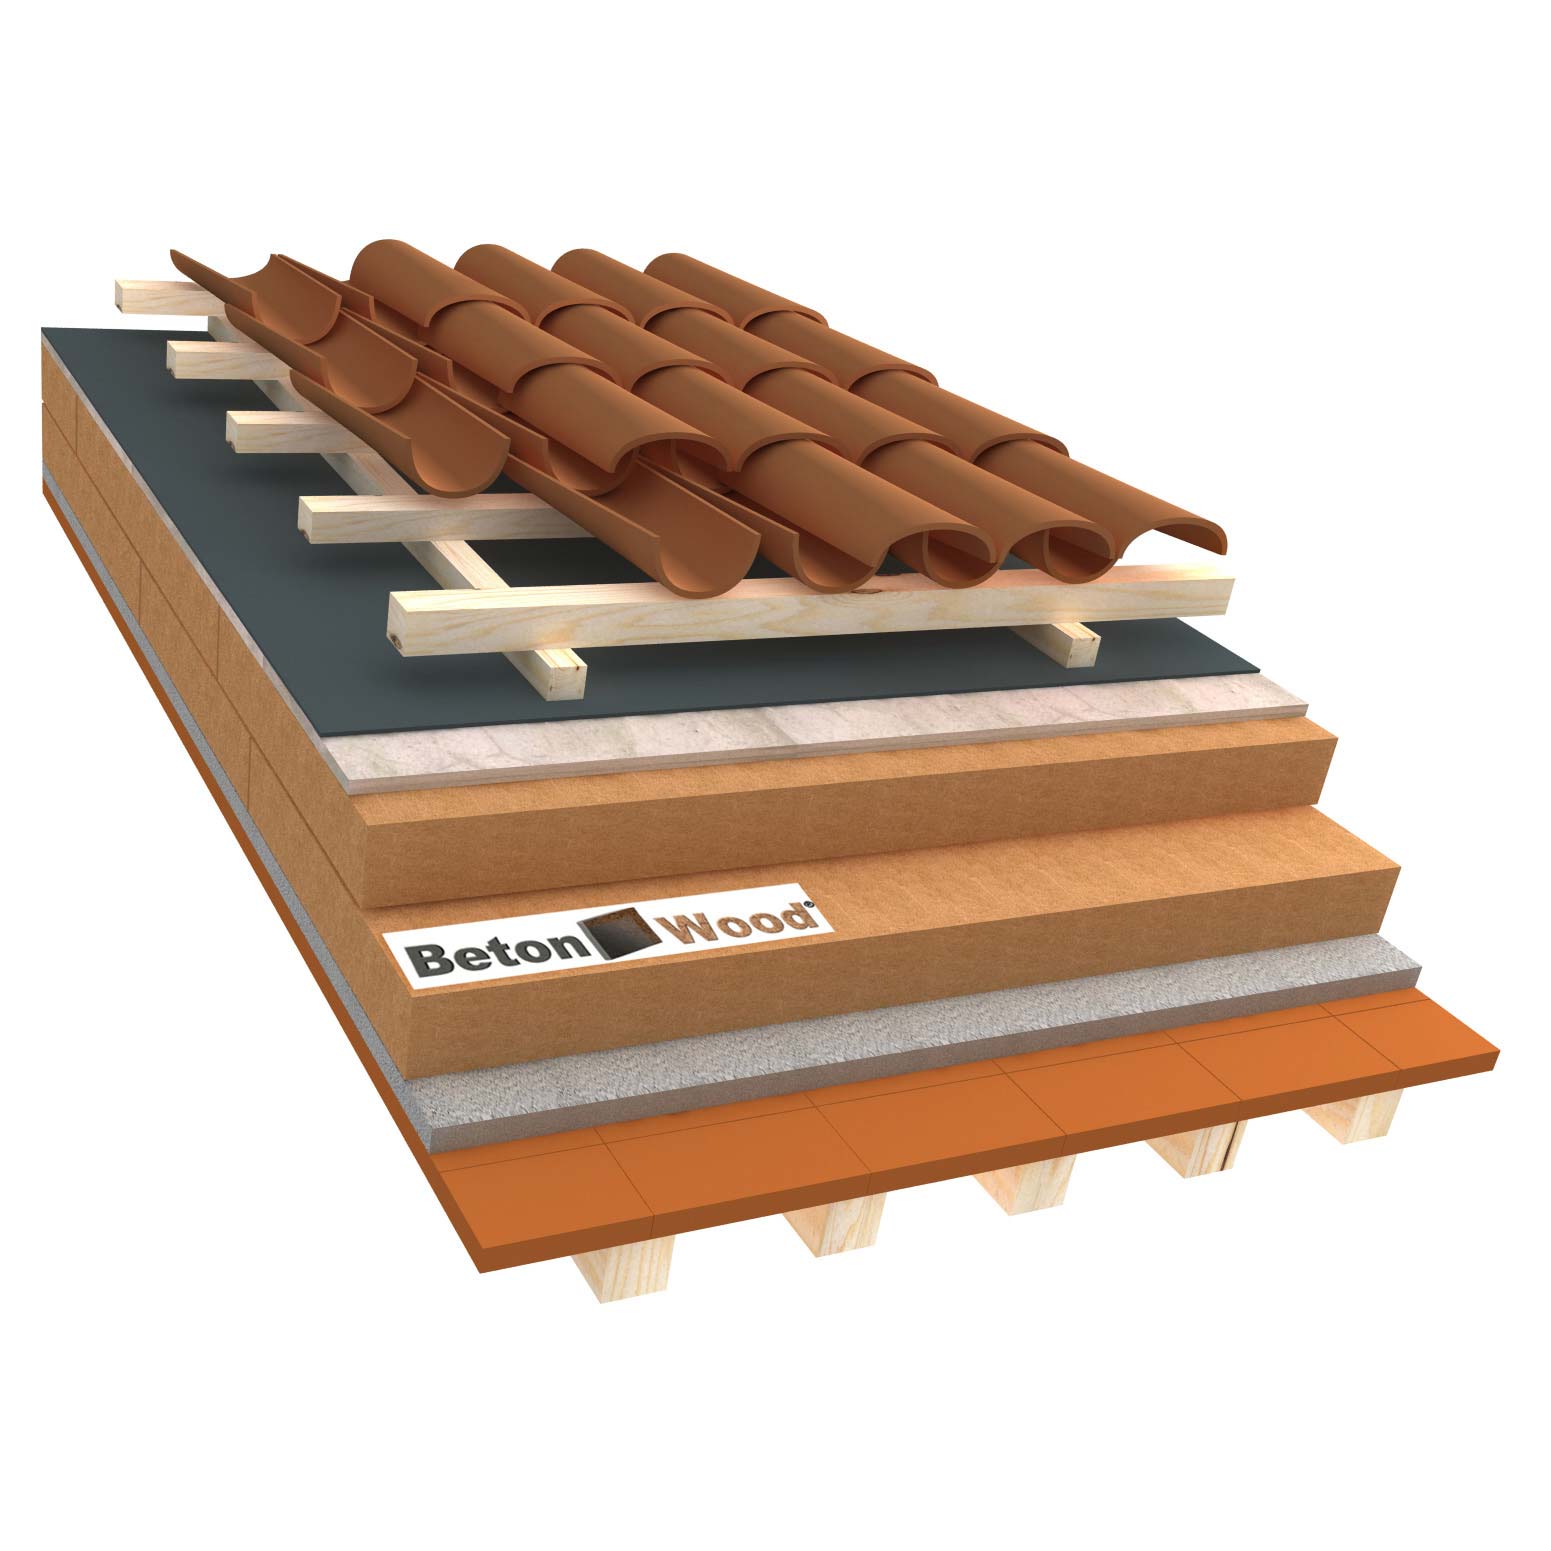 Ventilated roof with wood fiber Therm and cement bonded particle boards on terracotta tiles